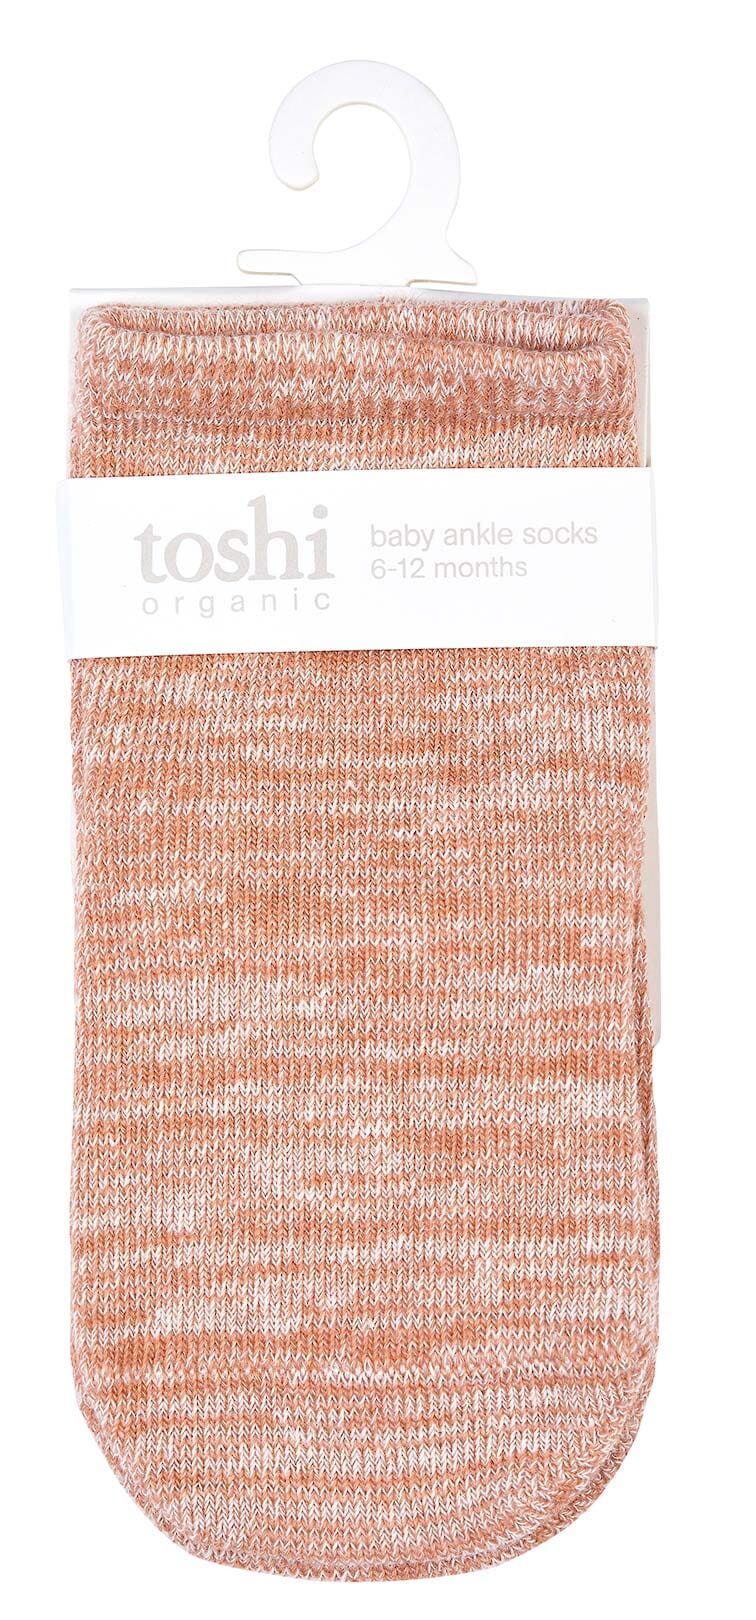 Organic Ankle Marle Sock - Feather Socks Toshi 